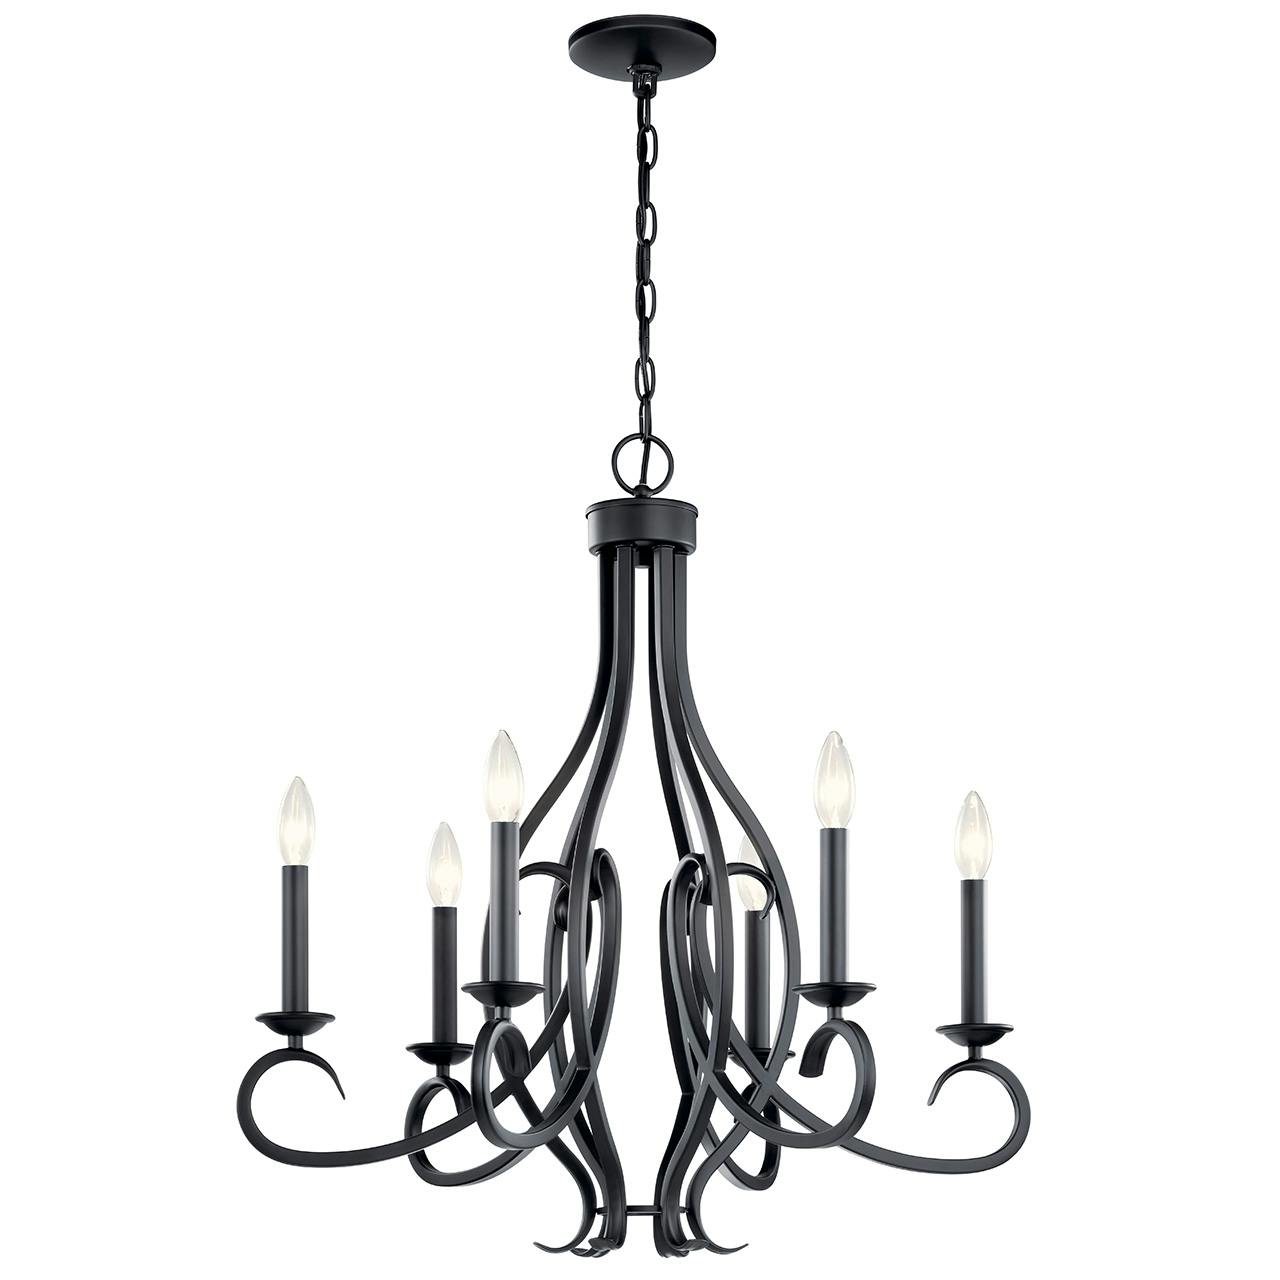 Ania 6 Light Chandelier in Black on a white background